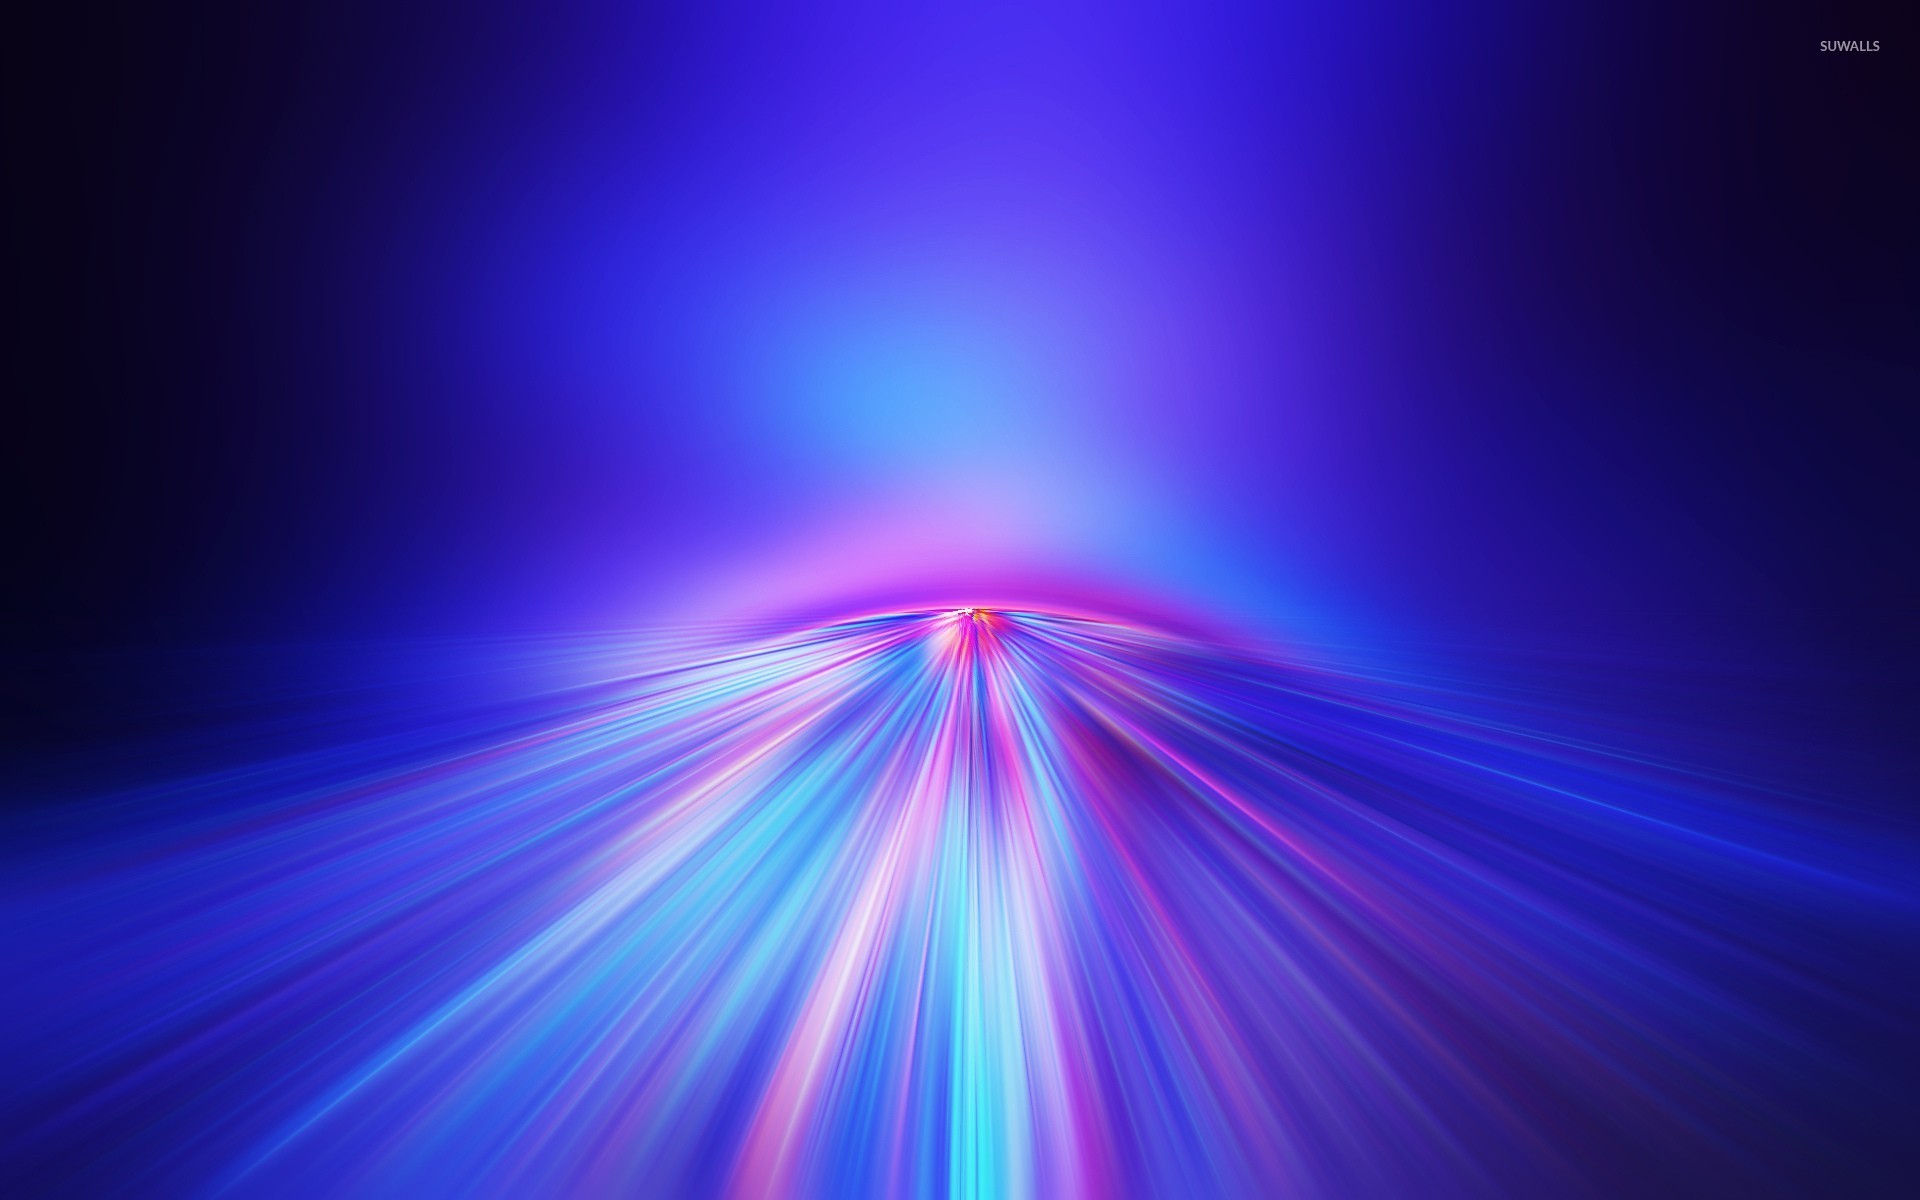 Light flare wallpaper - Abstract wallpapers - #25933